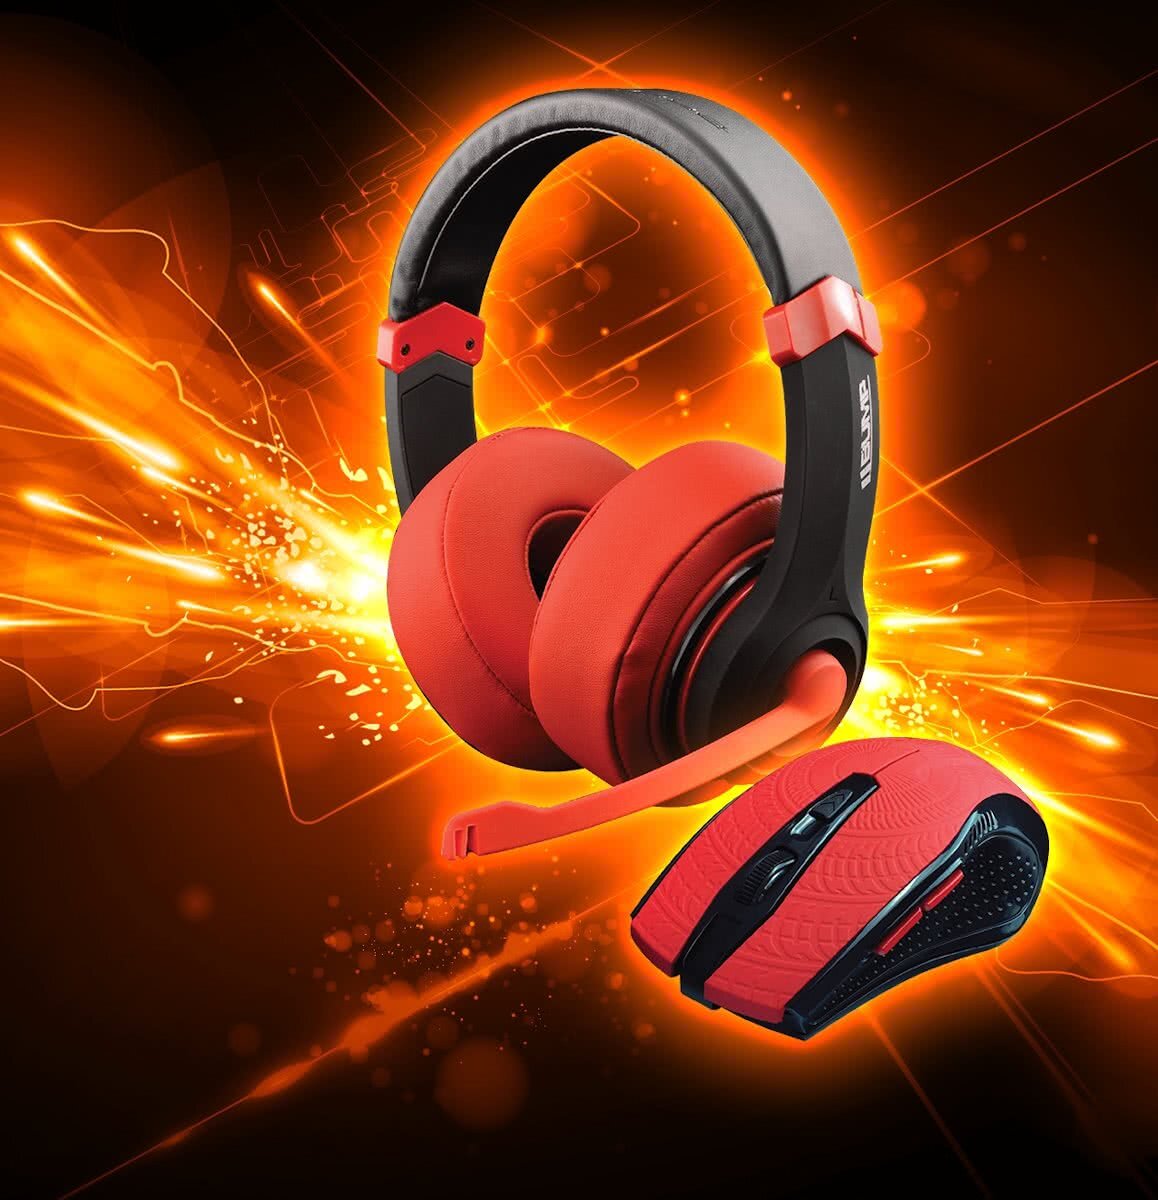 DRAGON WAR 2in1 Combo Set (Gaming Headset + Mouse) Red Edition